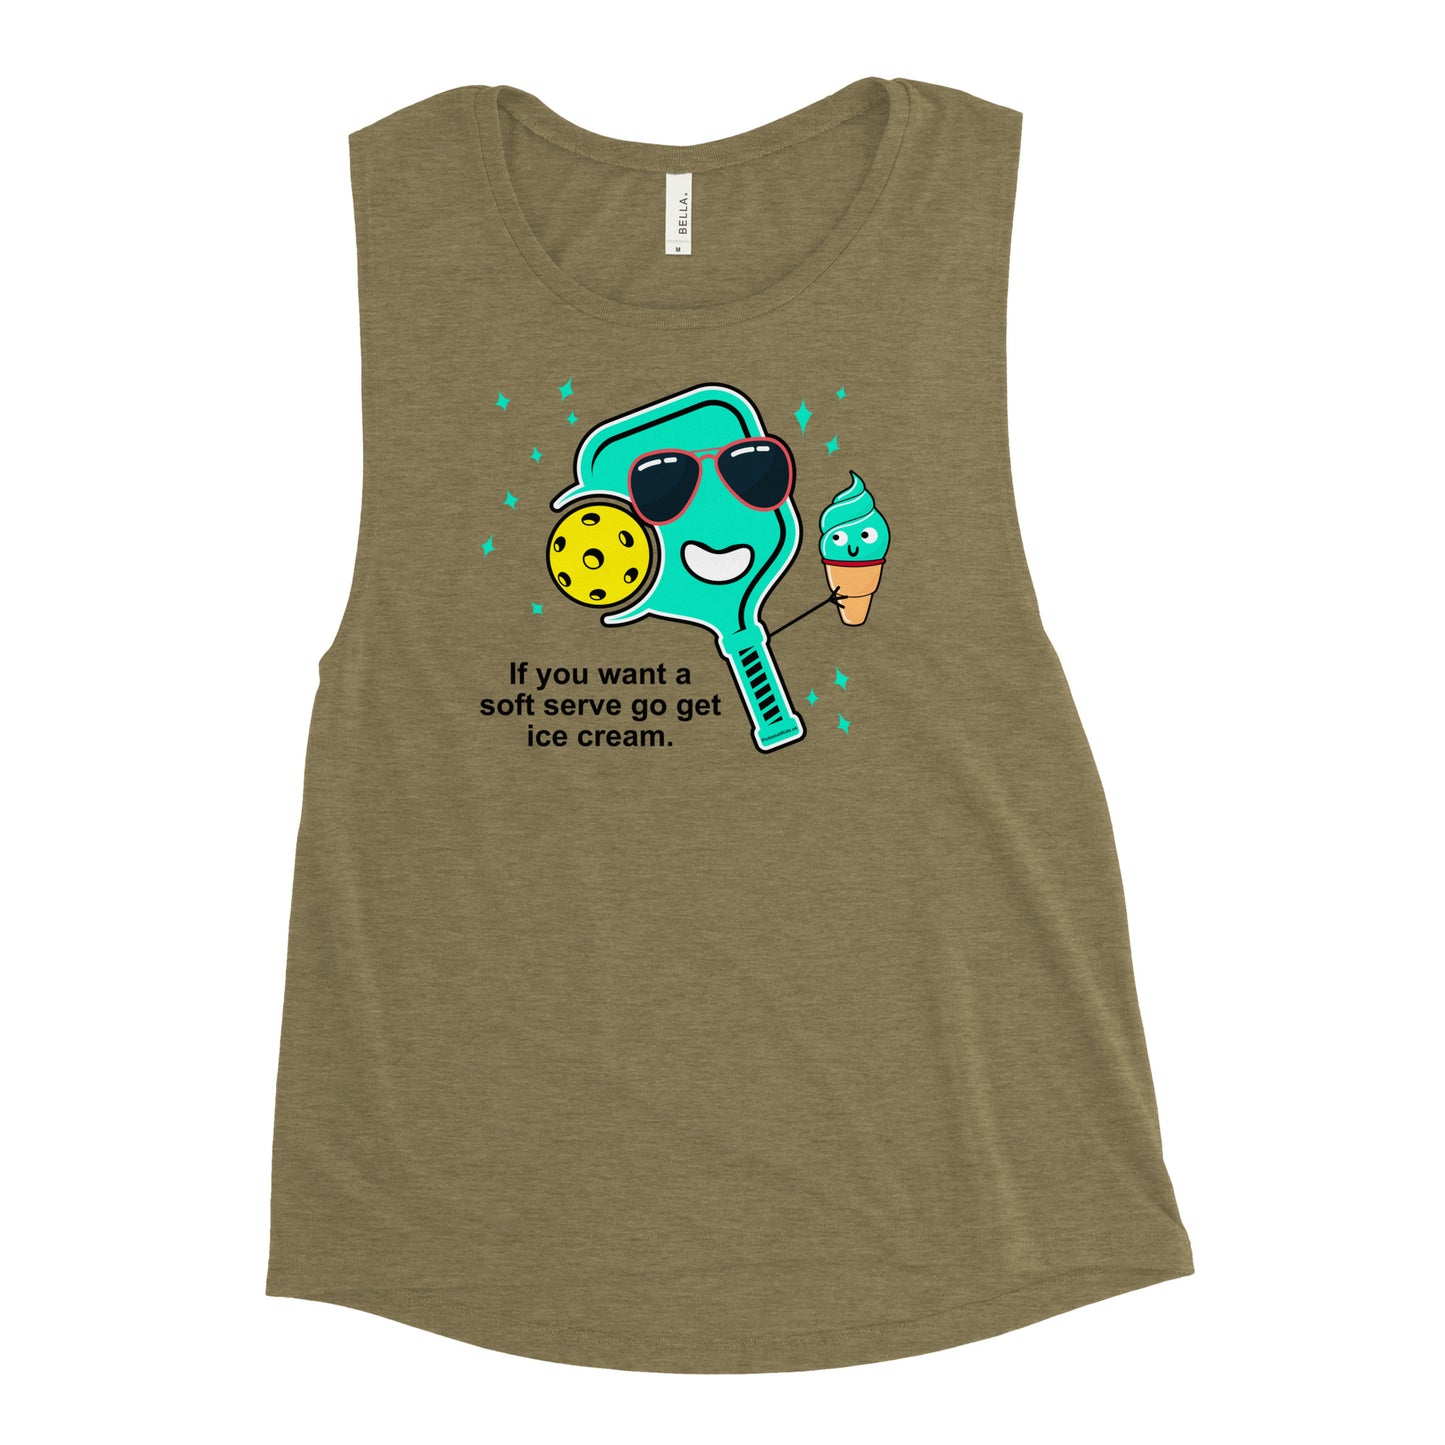 Ladies’ Pickleball Muscle Tank, "If You Want A Soft Serve Go Get Ice Cream."